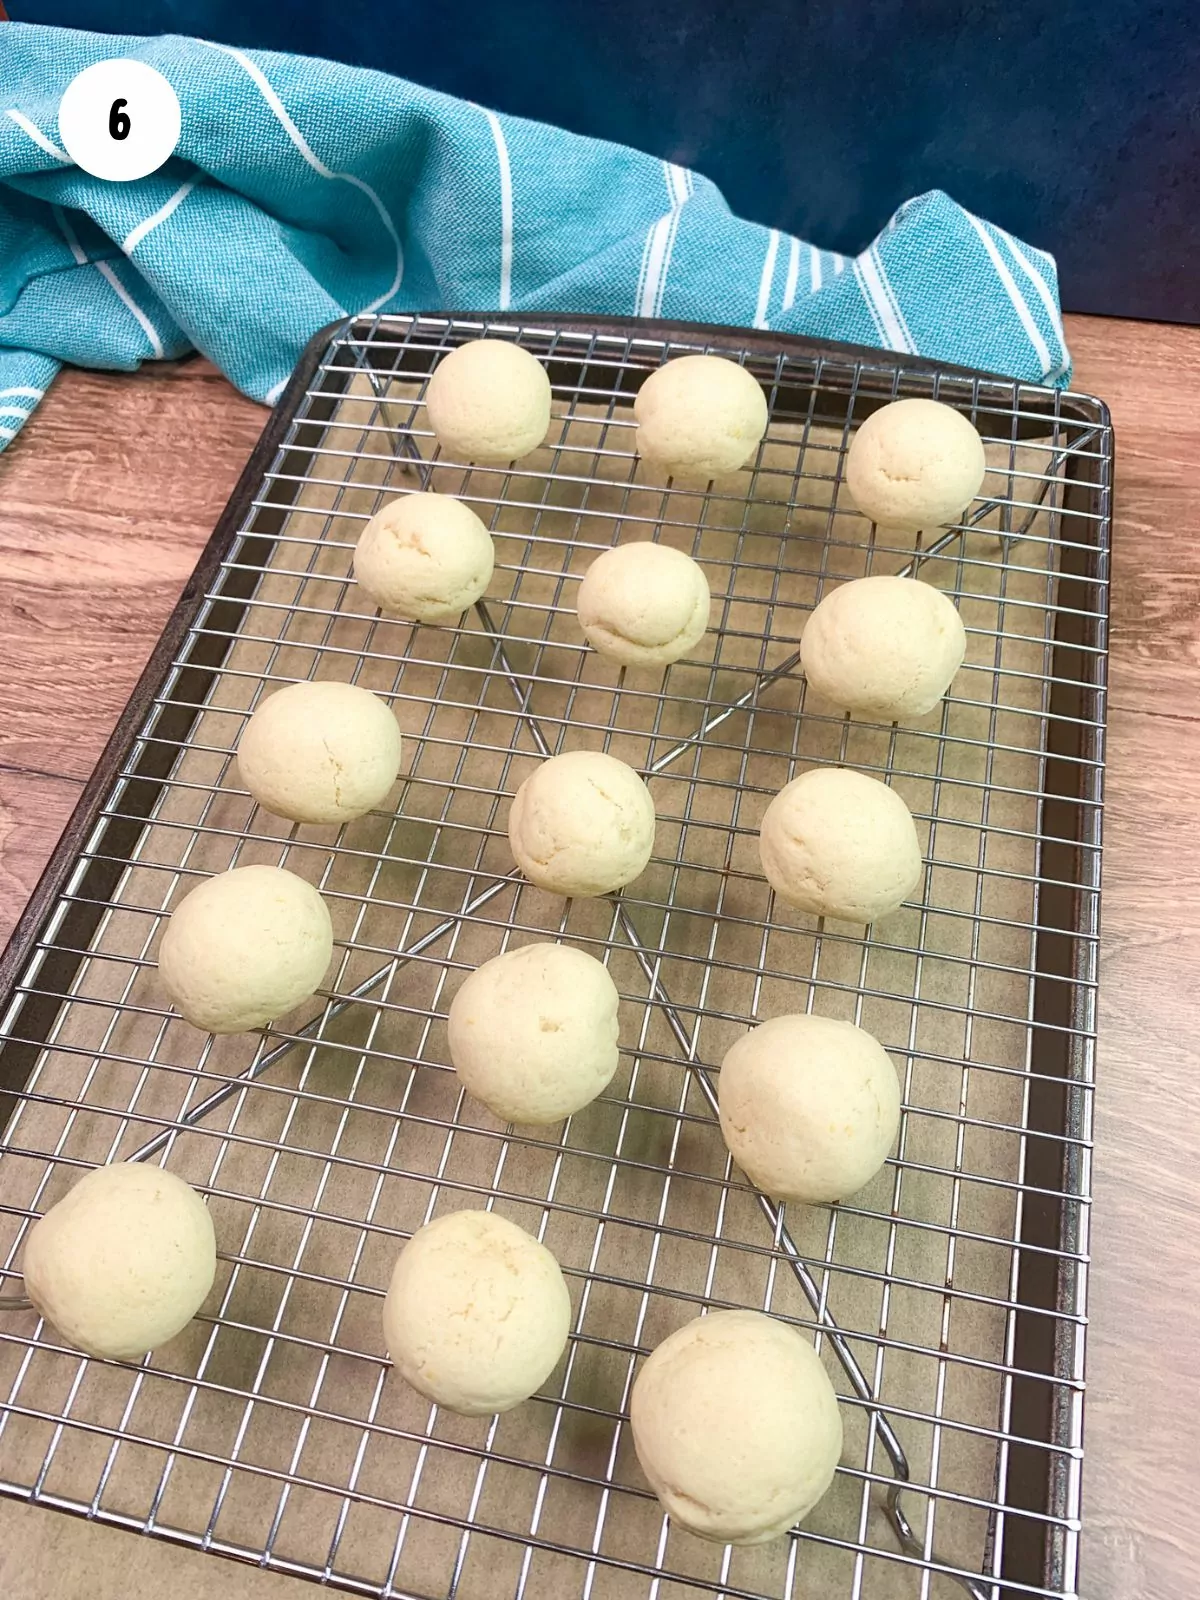 baked cookies on cooling rack.